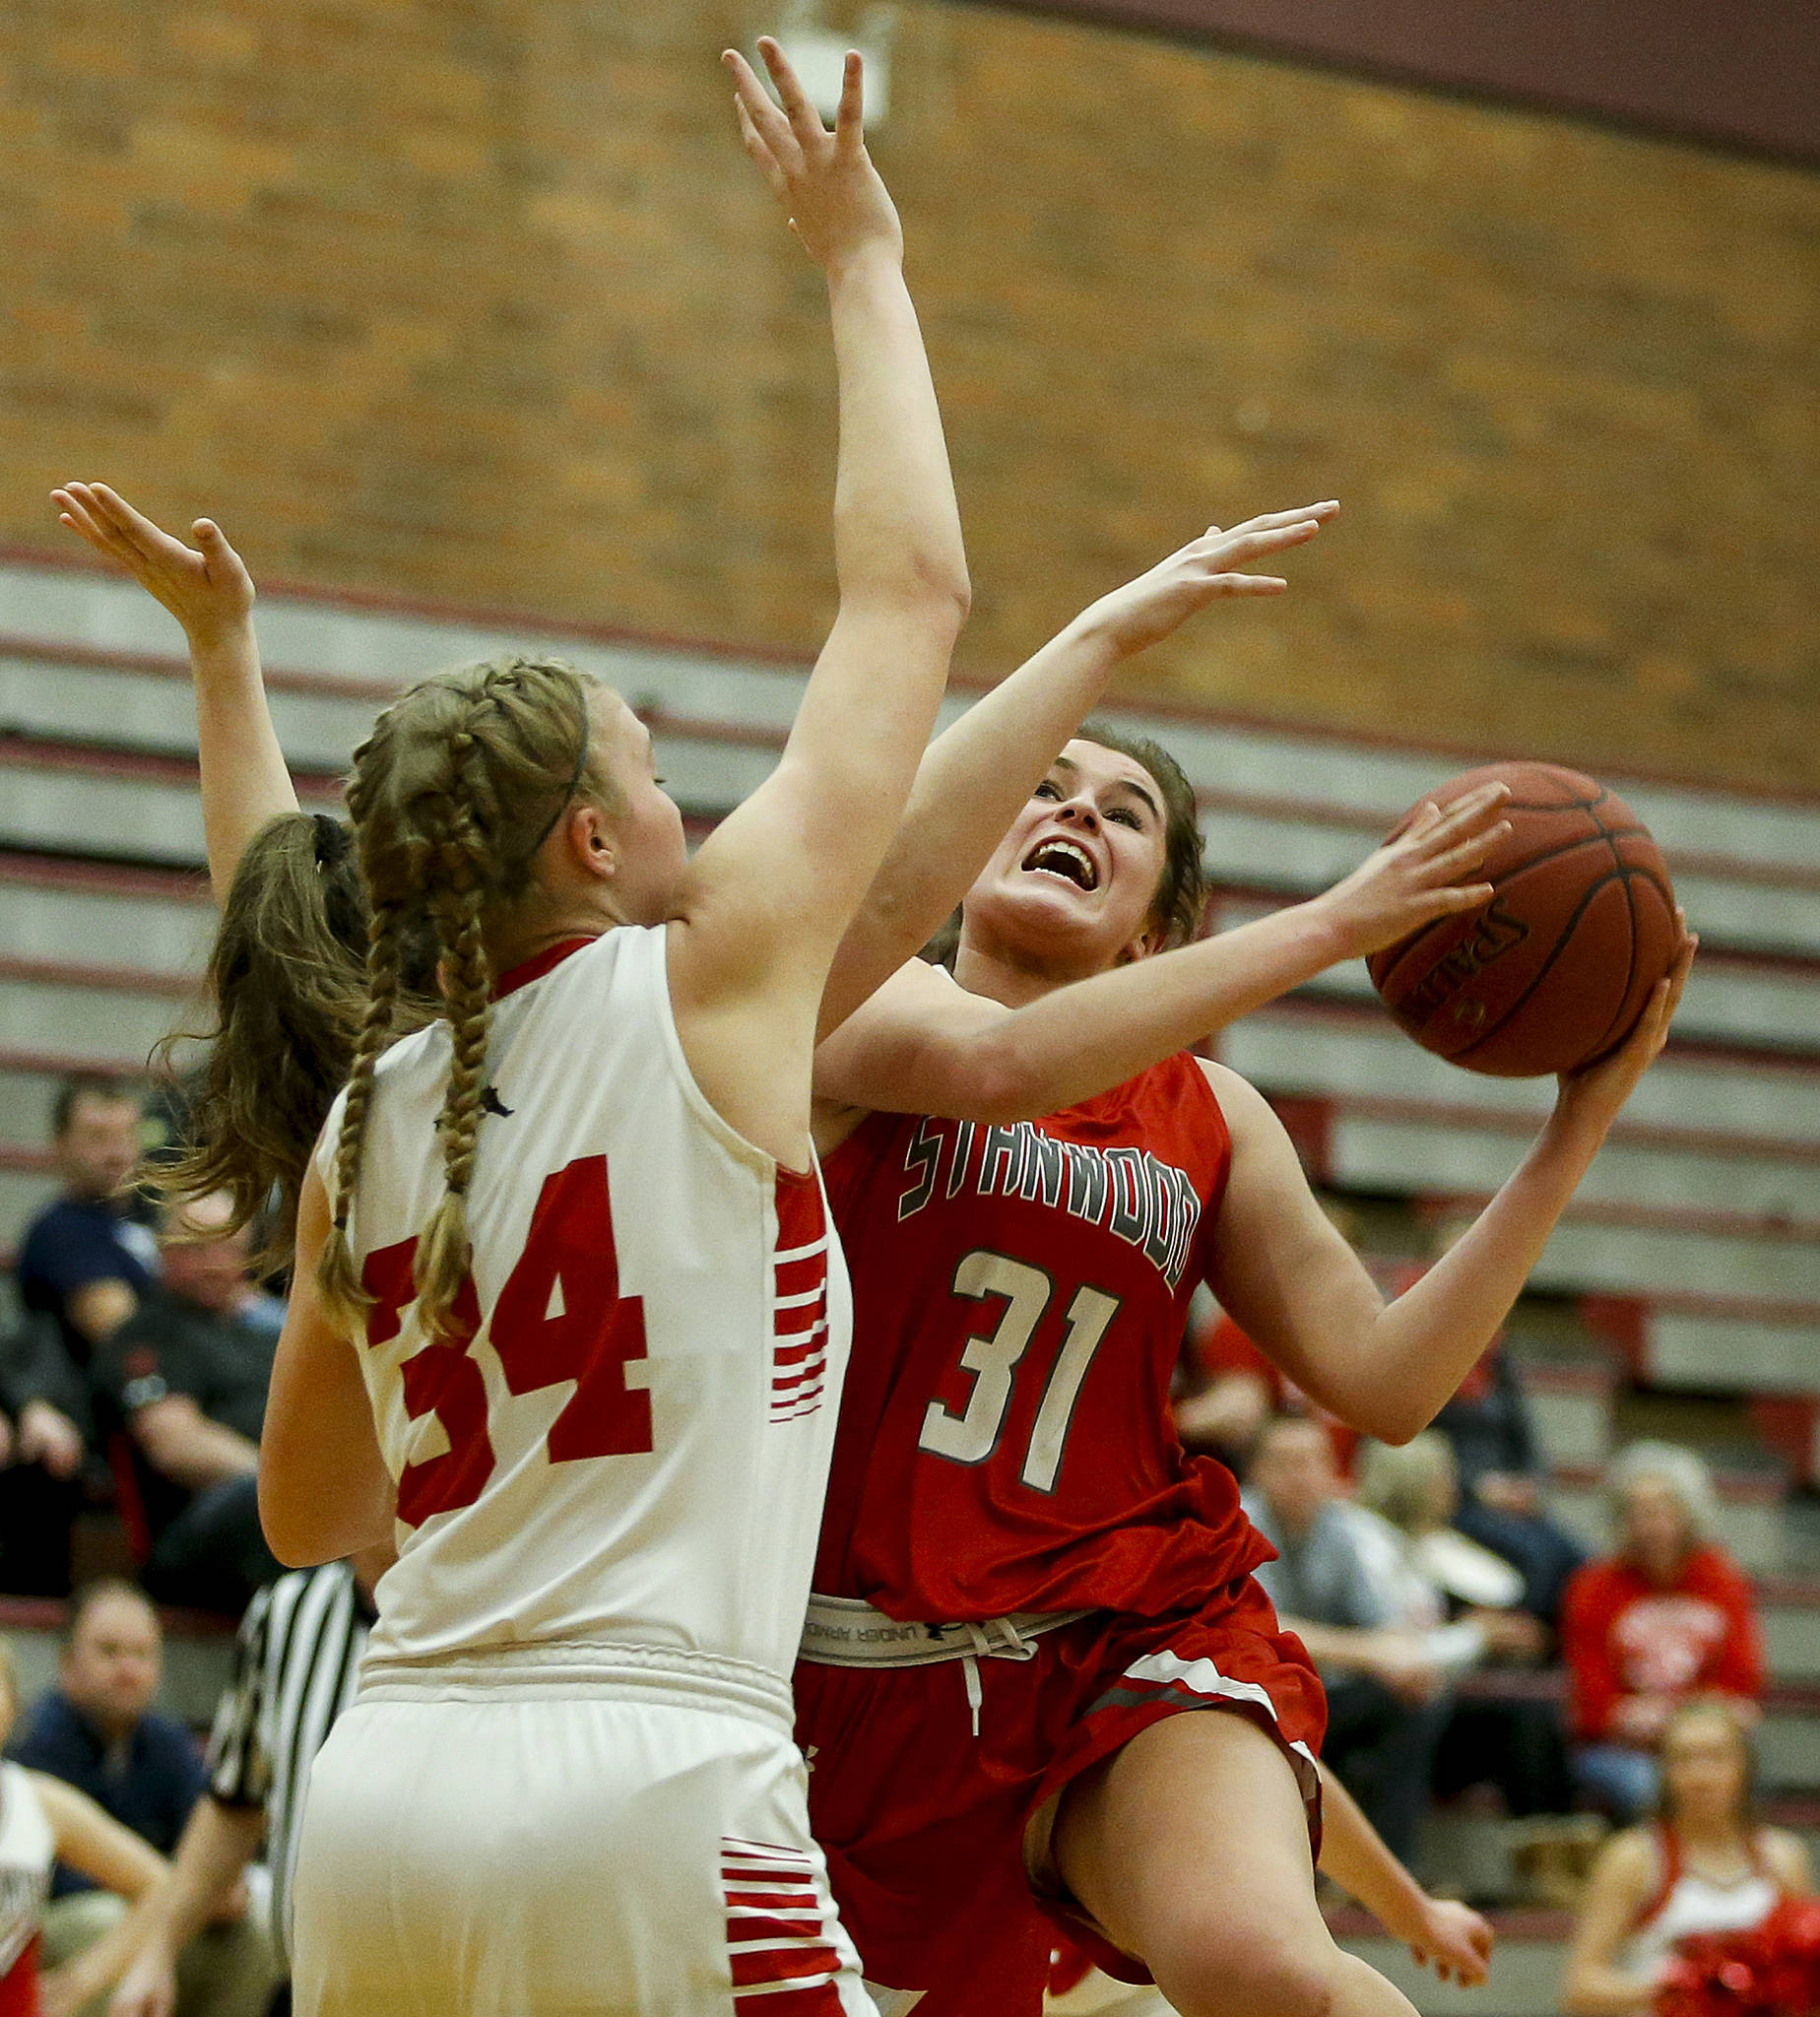 Stanwood’s Madison Chisman (31) takes a shot as Snohomish’s Kyra Beckman defends during a playoff game on Feb. 13, 2018, at Mountlake Terrace High School. (Ian Terry / The Herald)